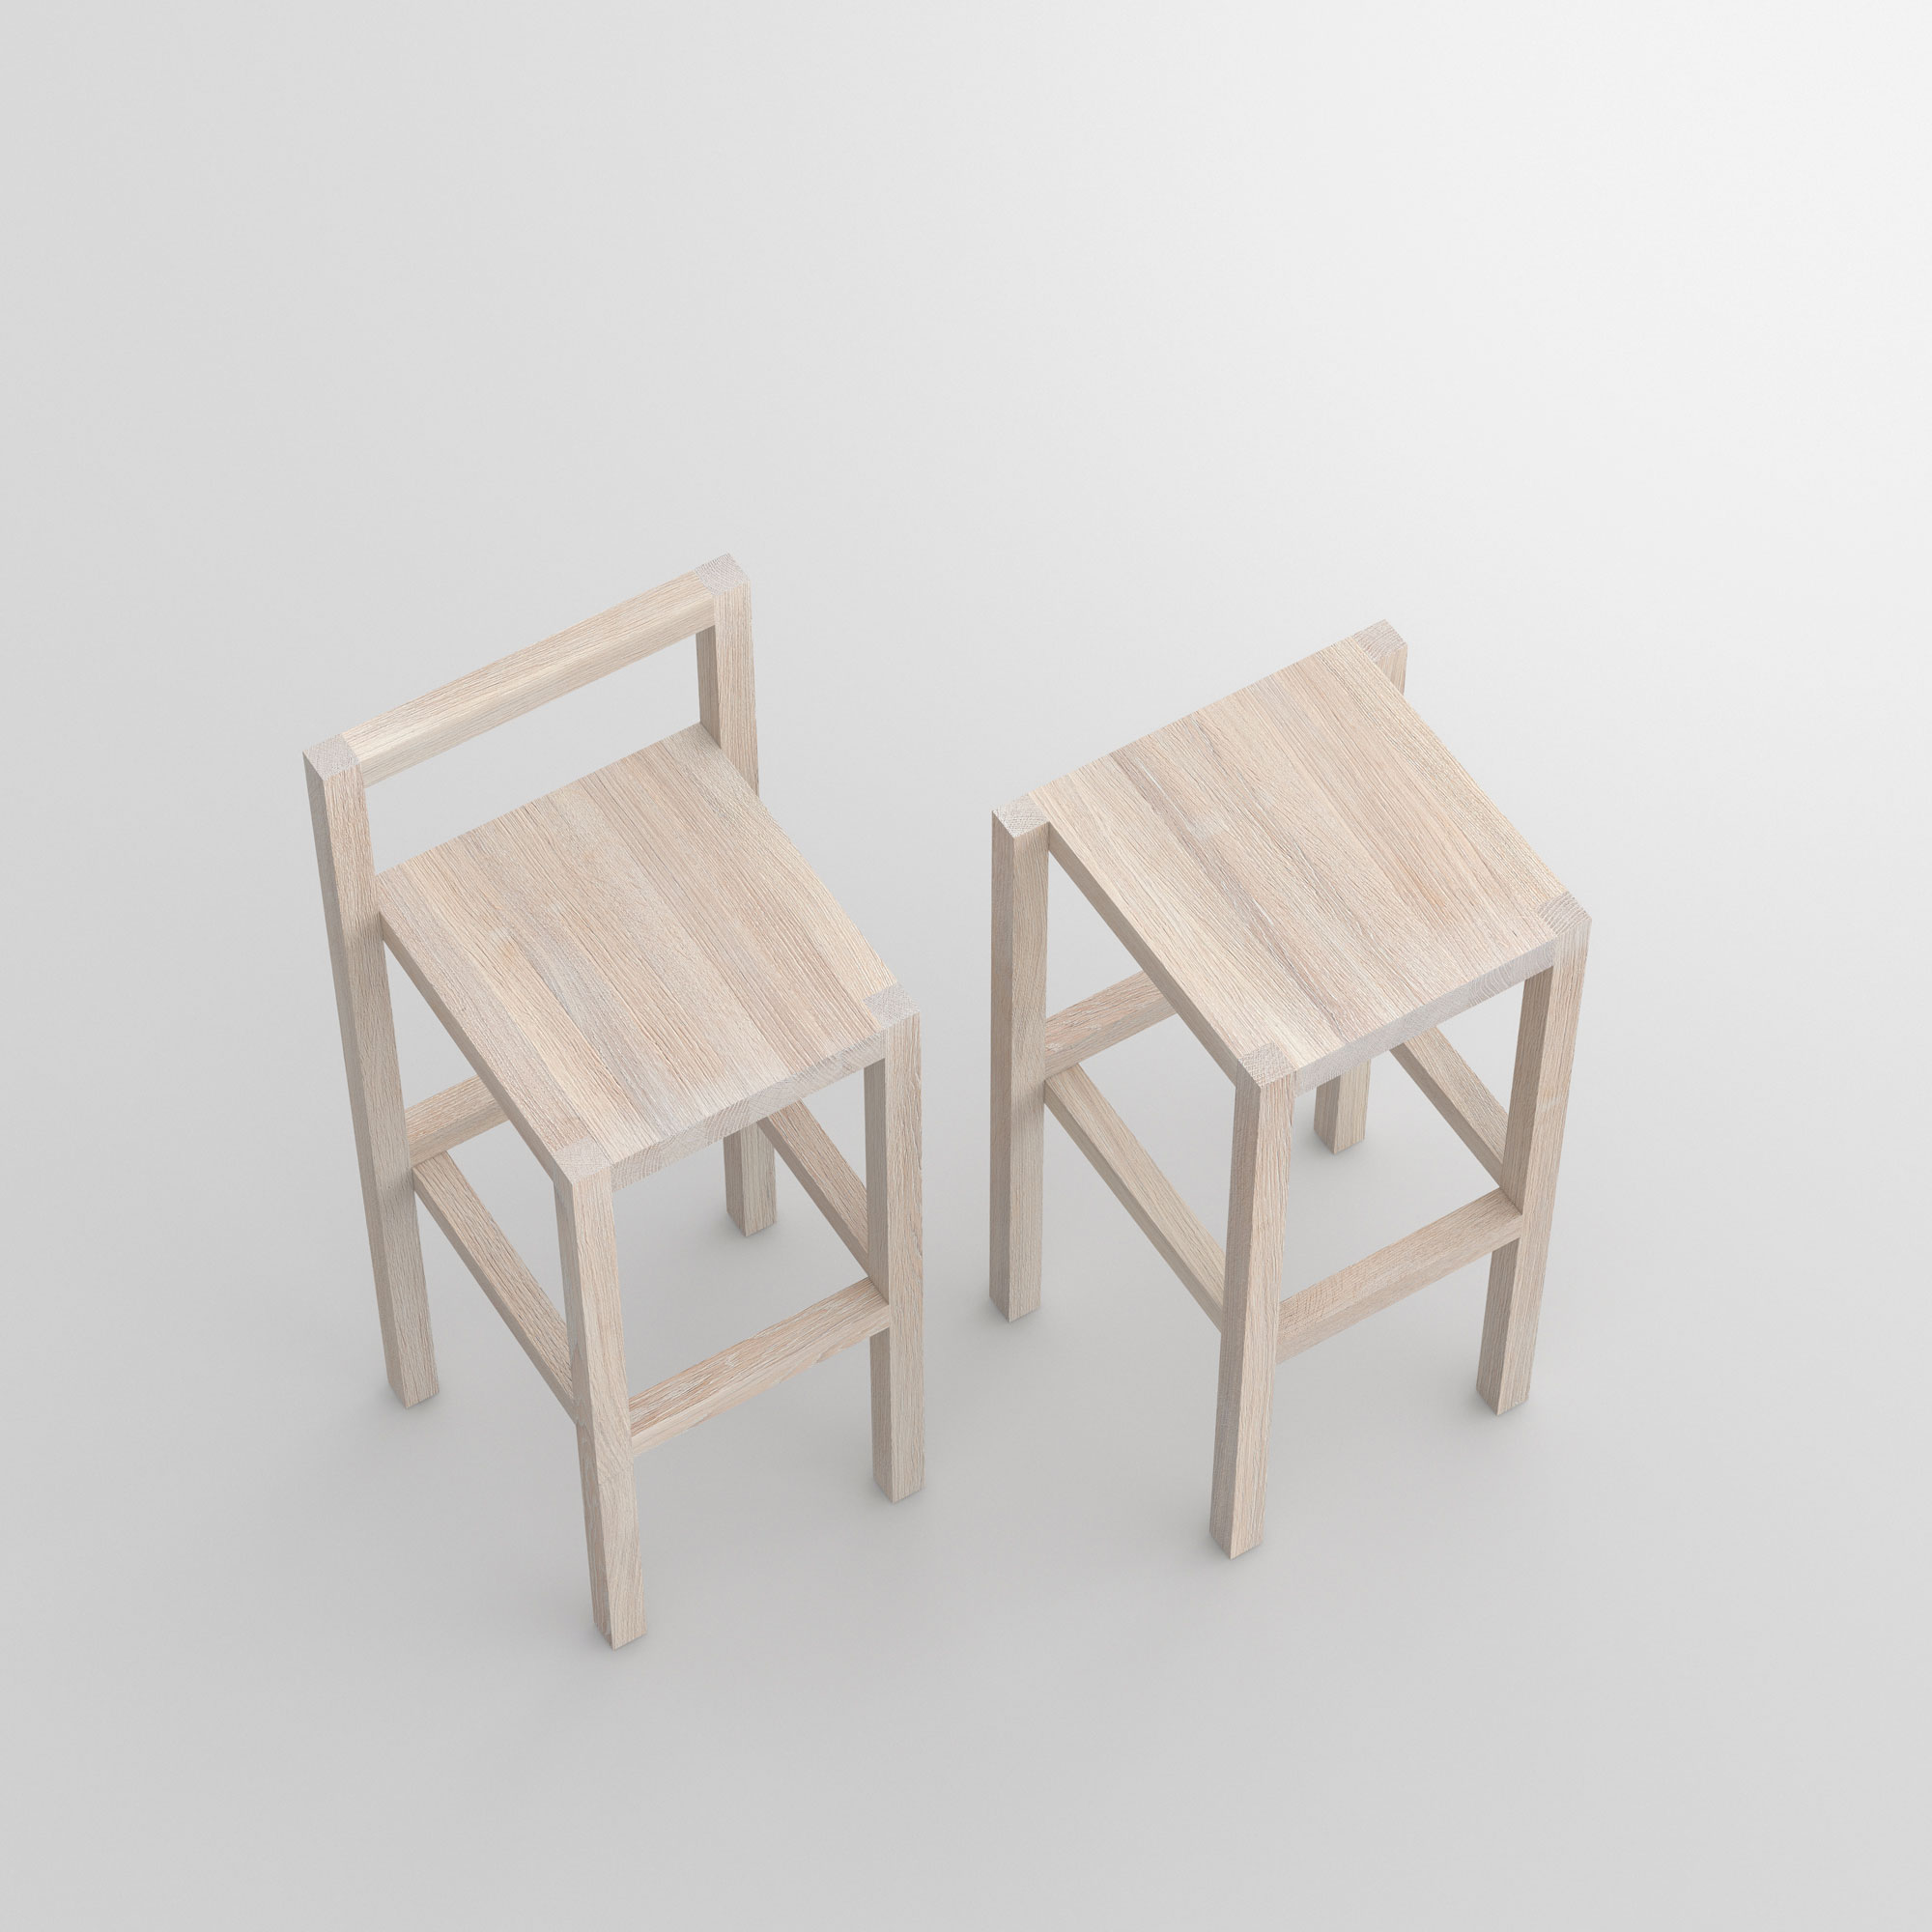 Solid Wood Bar Stool PALI cam2 custom made in solid wood by vitamin design